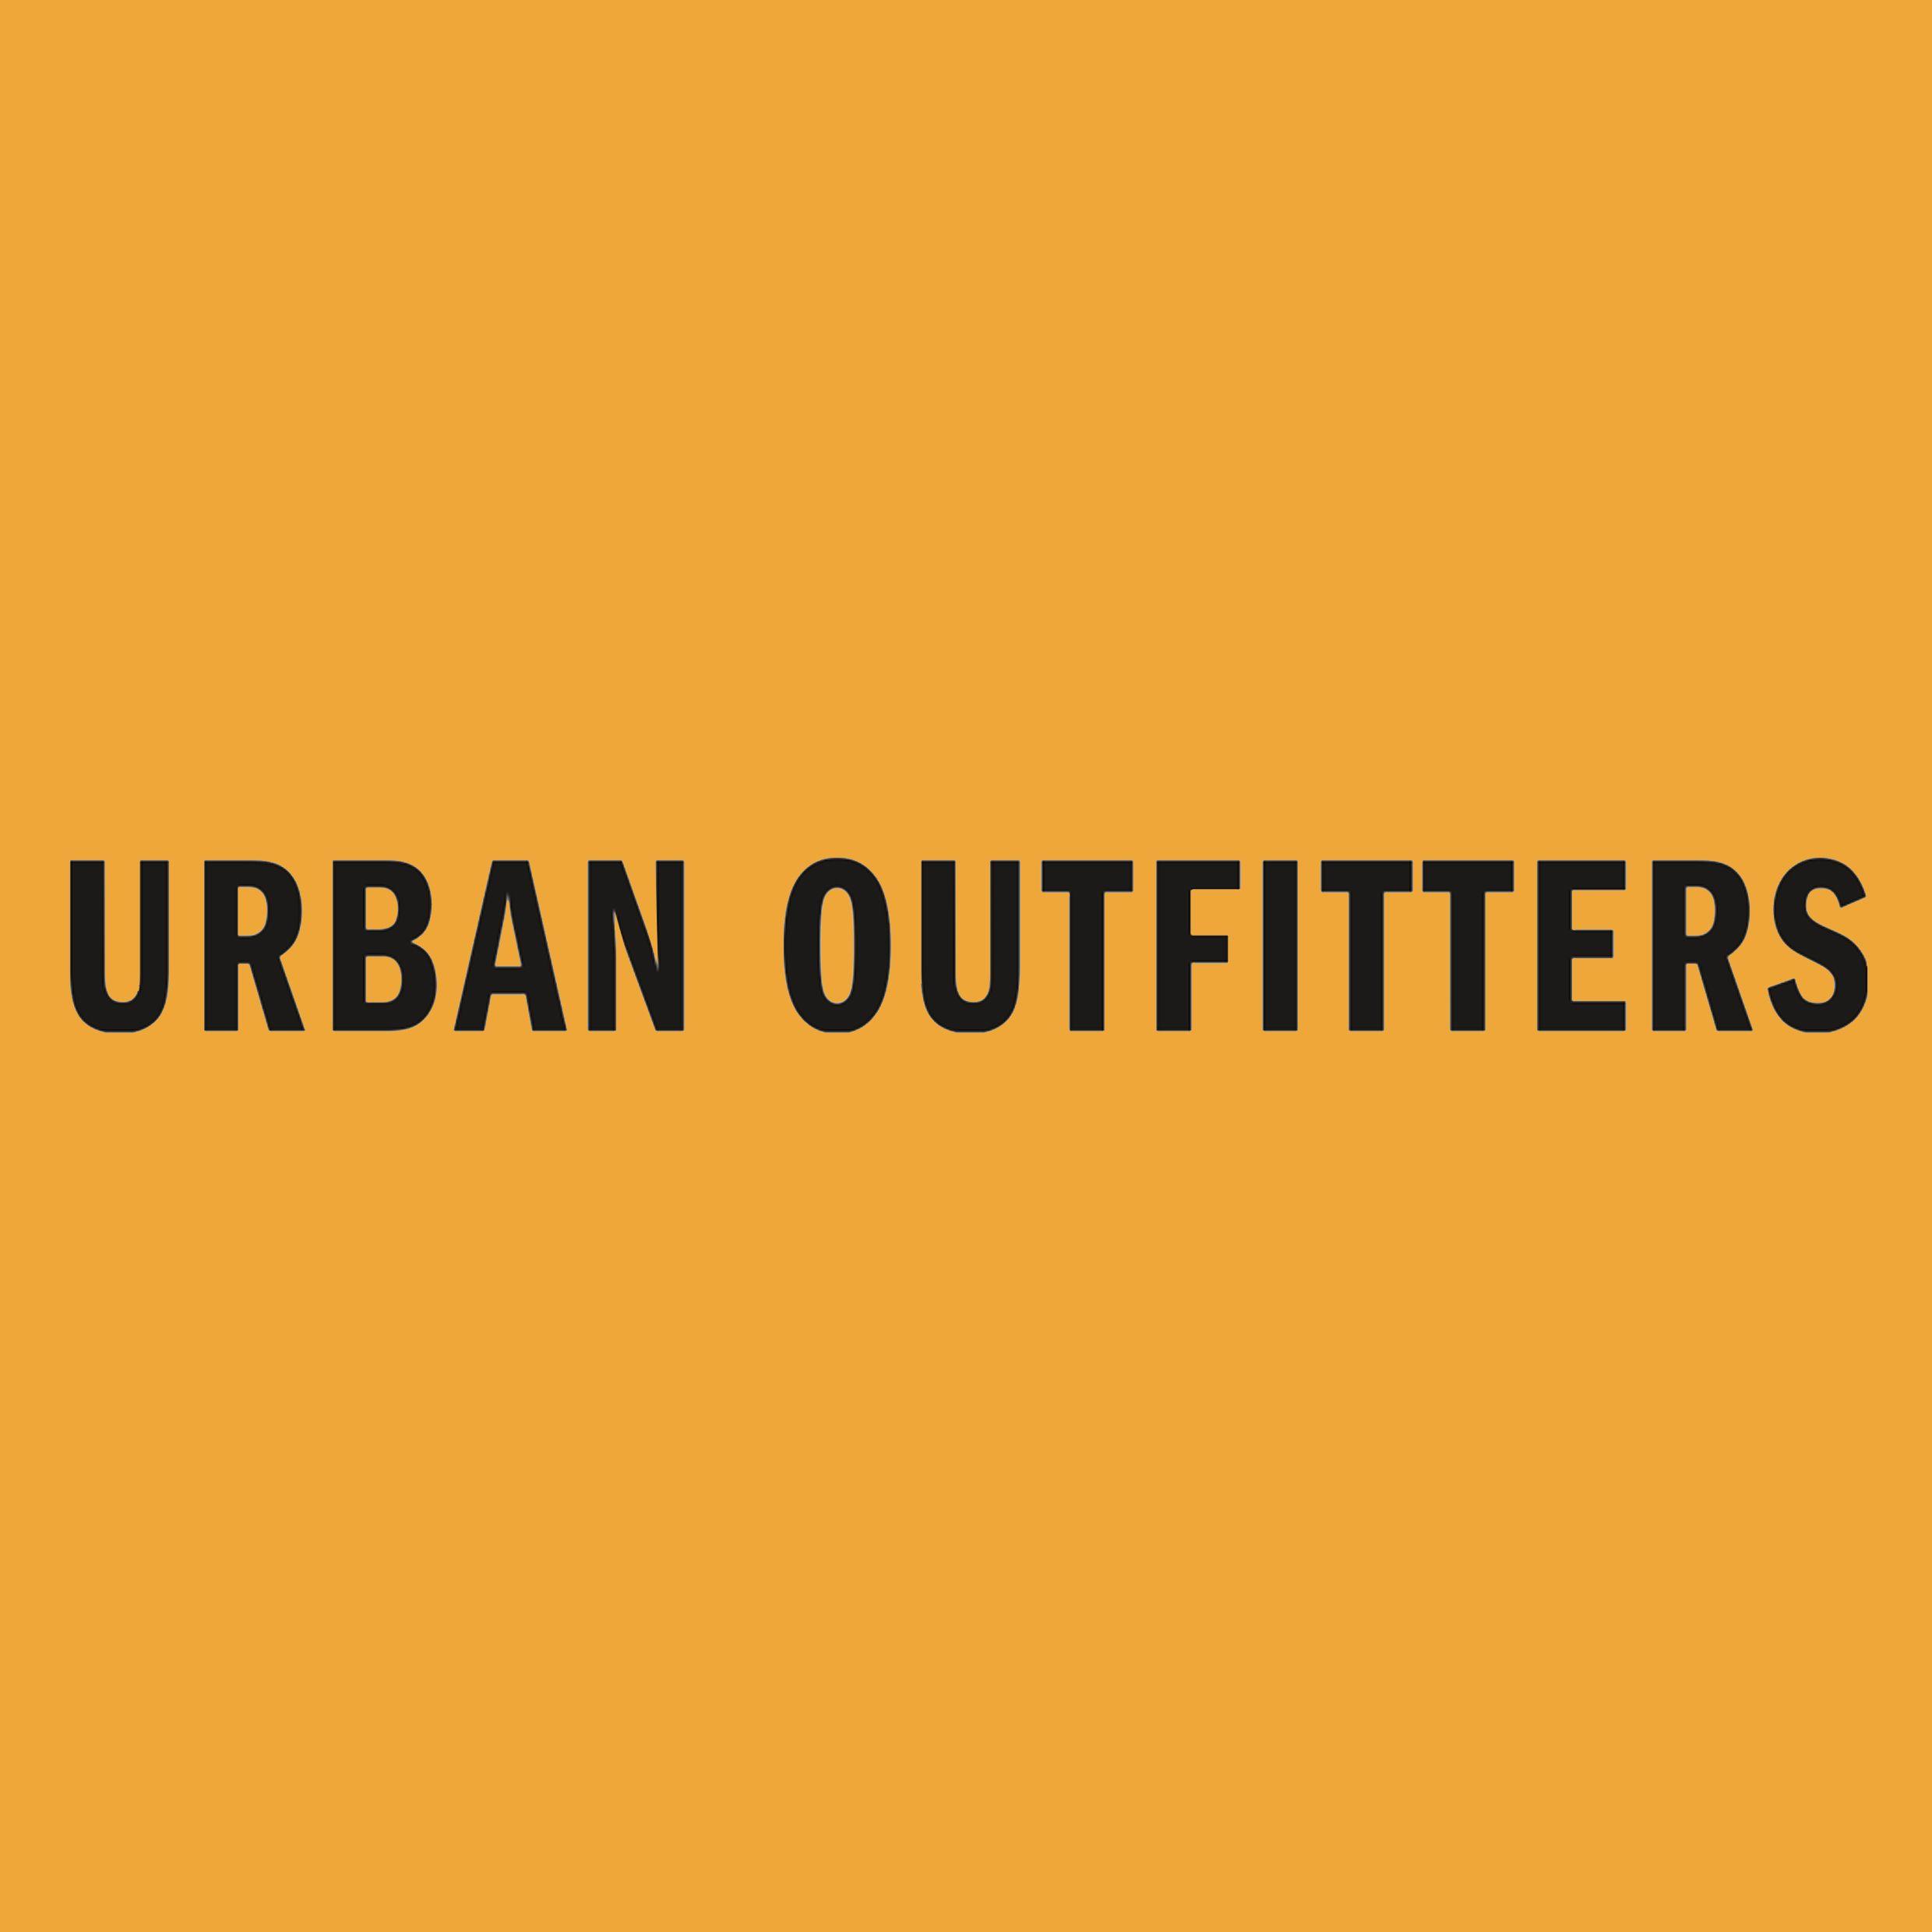 Urban Outfitters Logo - URBAN OUTFITTERS — SARAH T. SHANNON